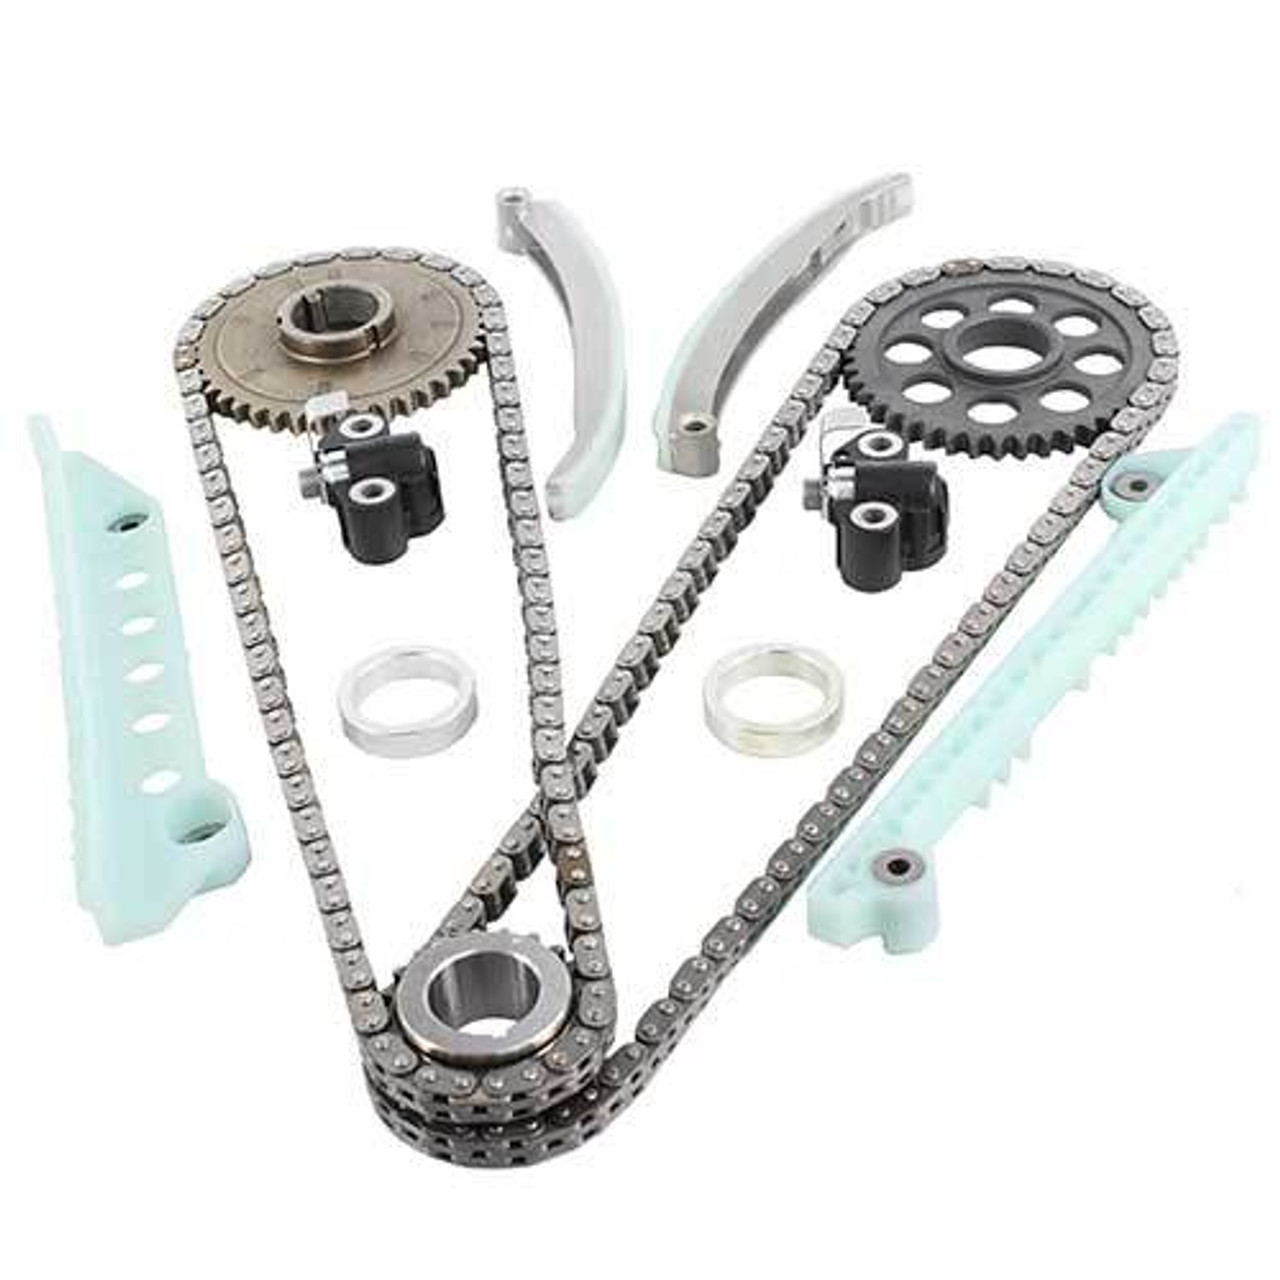 Timing Chain Kit - 2013 Ford E-250 4.6L Engine Parts # TK4221ZE11